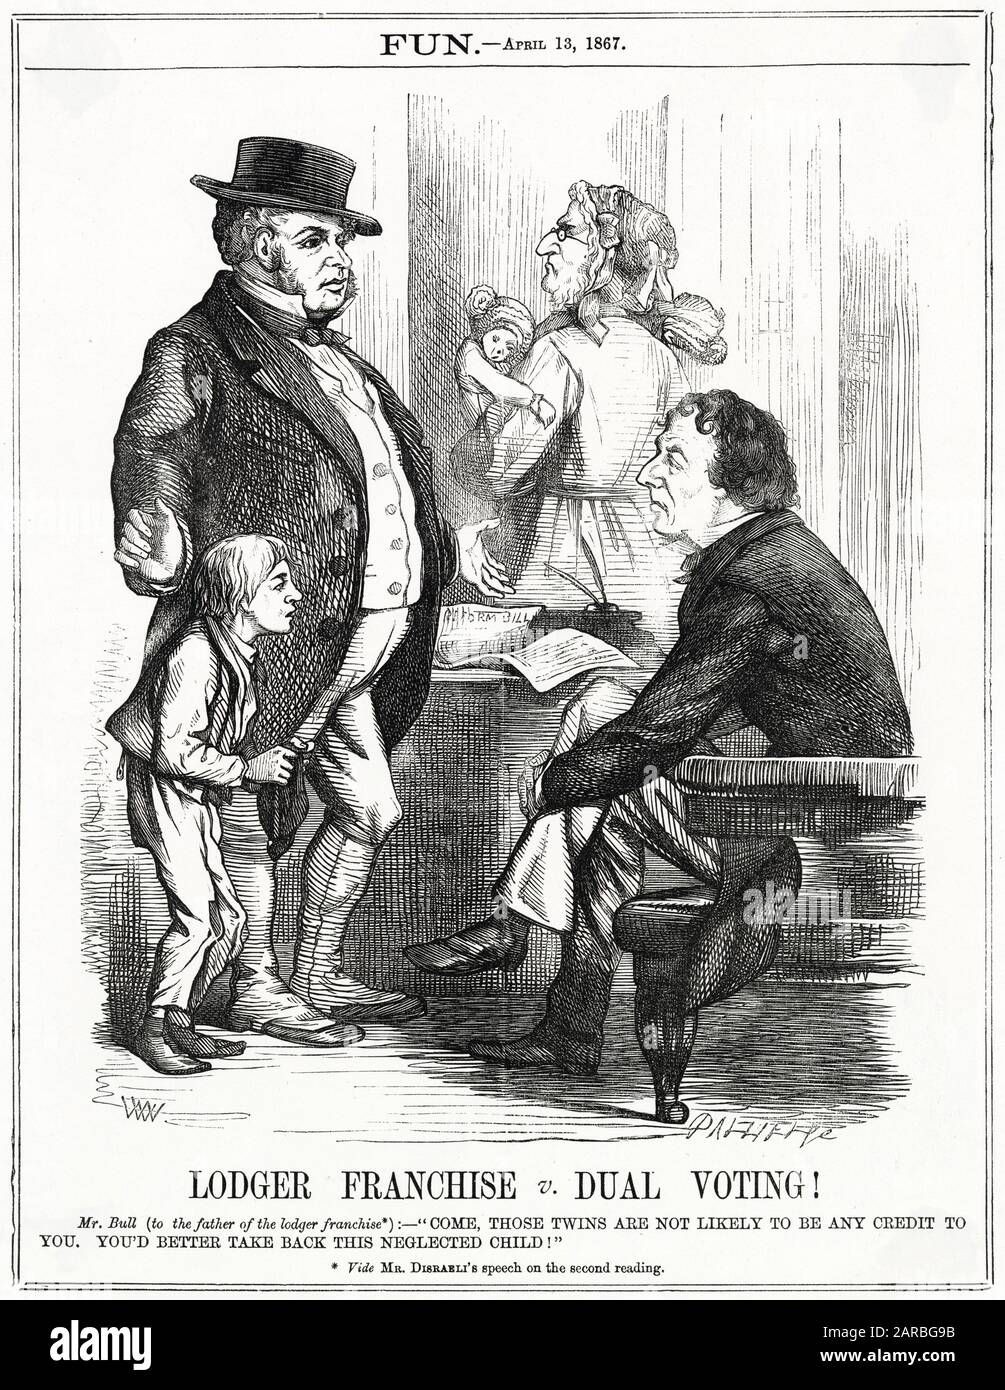 Cartoon, Lodger Franchise v Dual Voting!  A satirical comment on the arguments surrounding the extension of the franchise to include lodgers in Disraeli's Reform Bill. John Bull tries to speak reason to Disraeli, while a grumpy Gladstone stands in the background, dressed as a woman holding a baby. Stock Photo